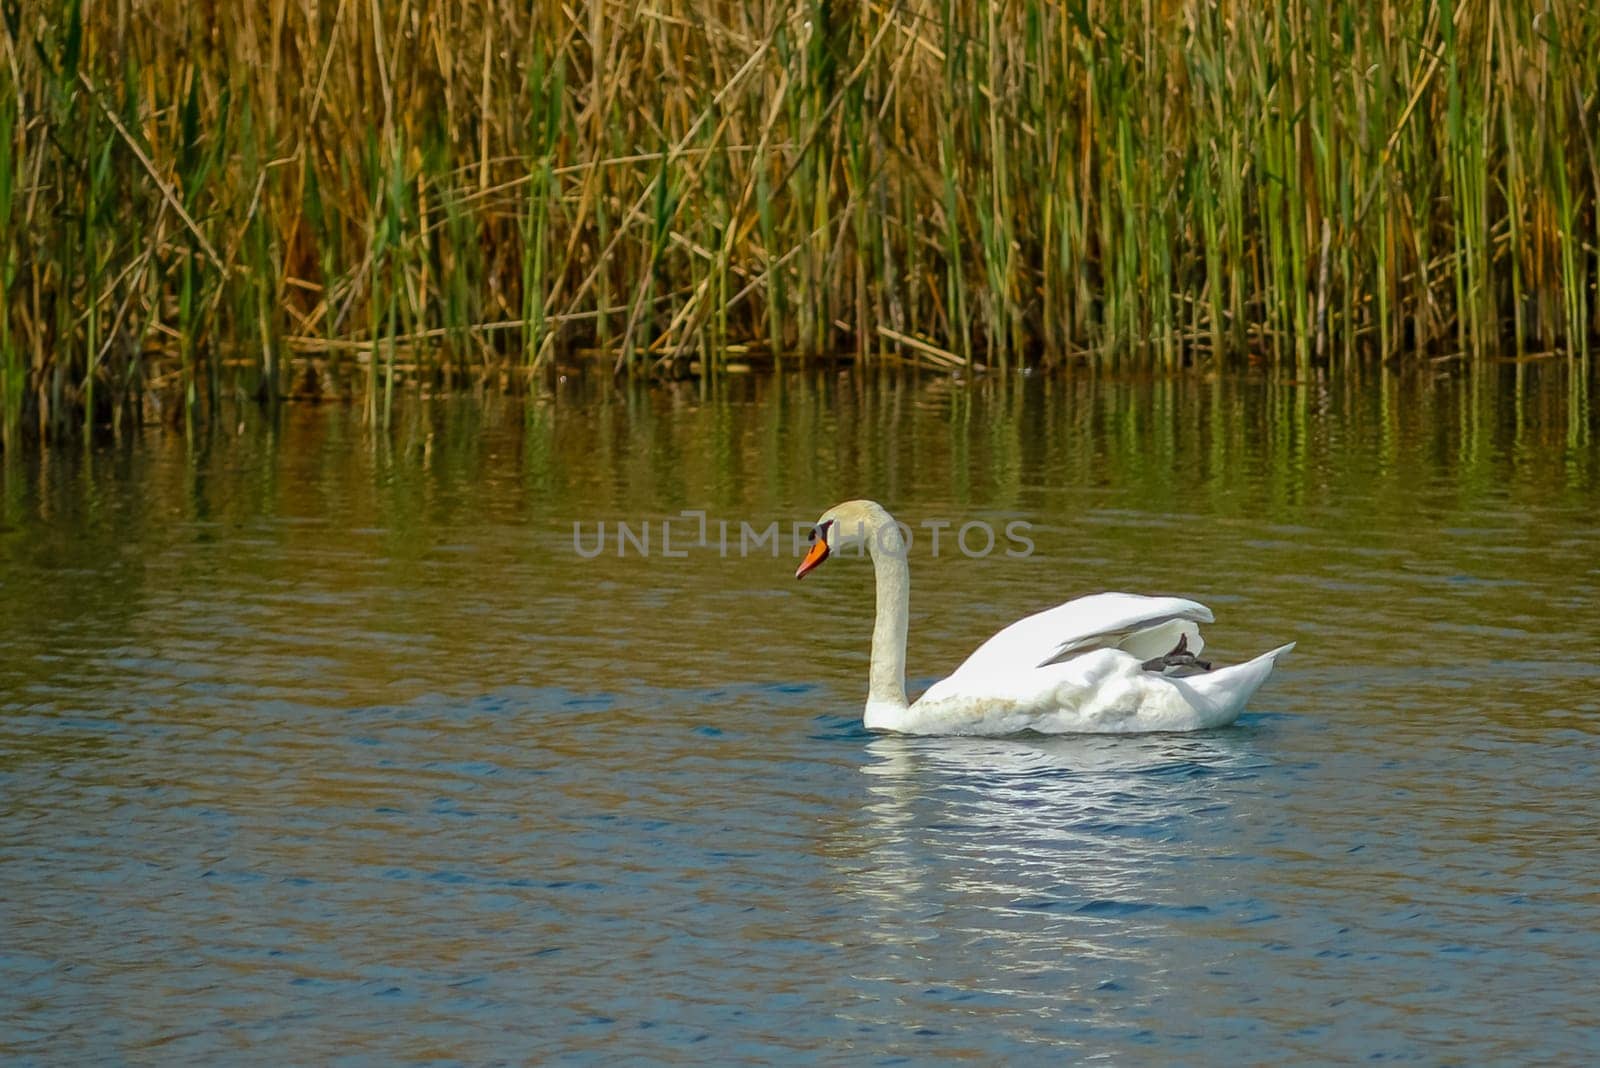 a white swan (Cygnus olor), floating near a thicket of reeds